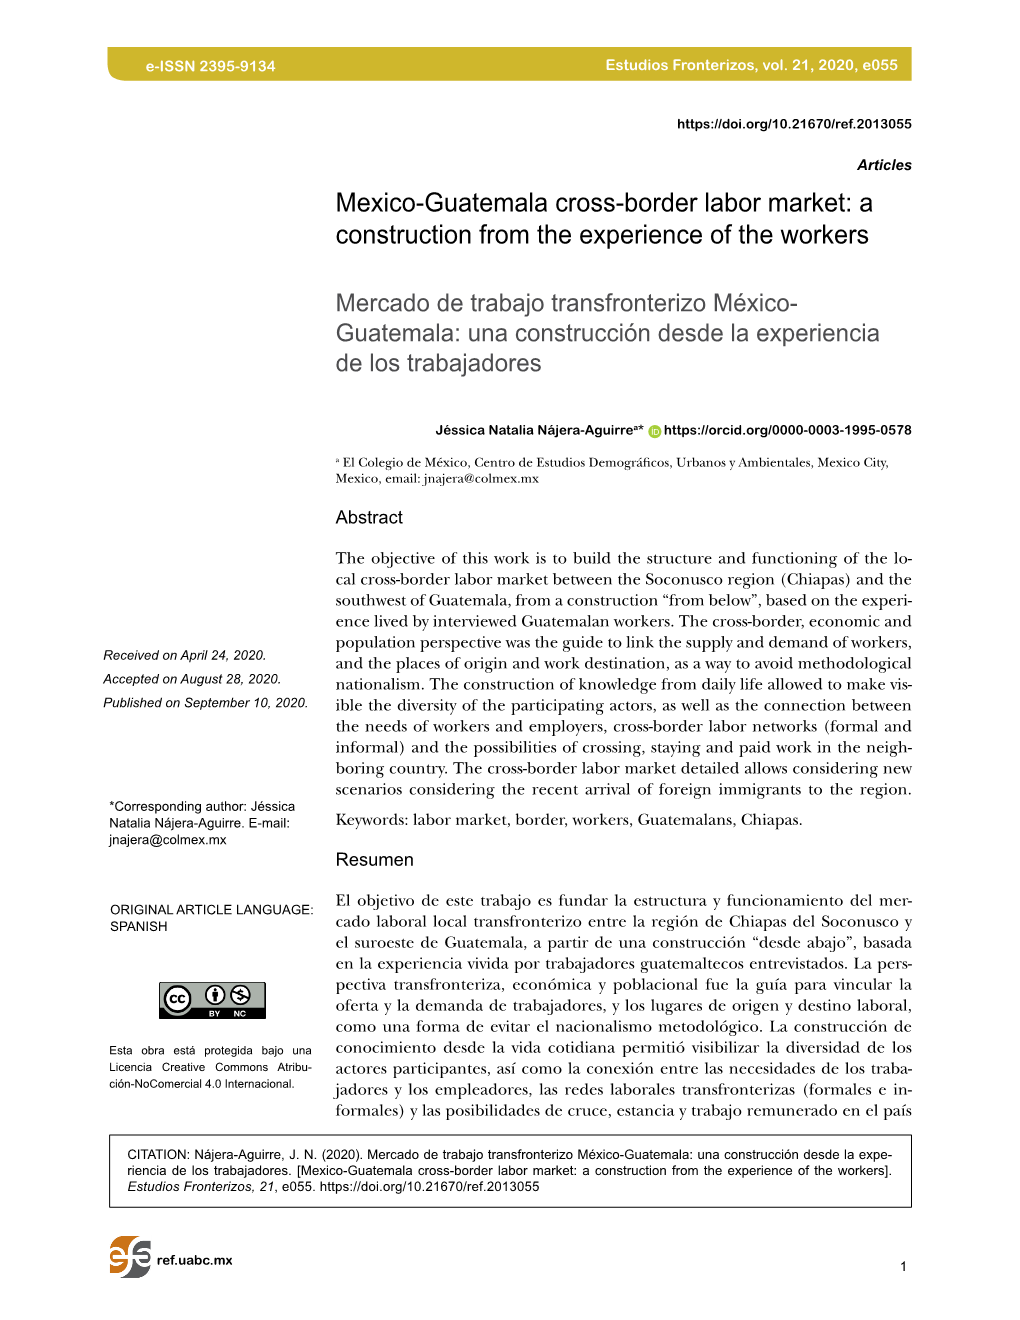 Mexico-Guatemala Cross-Border Labor Market: a Construction from the Experience of the Workers